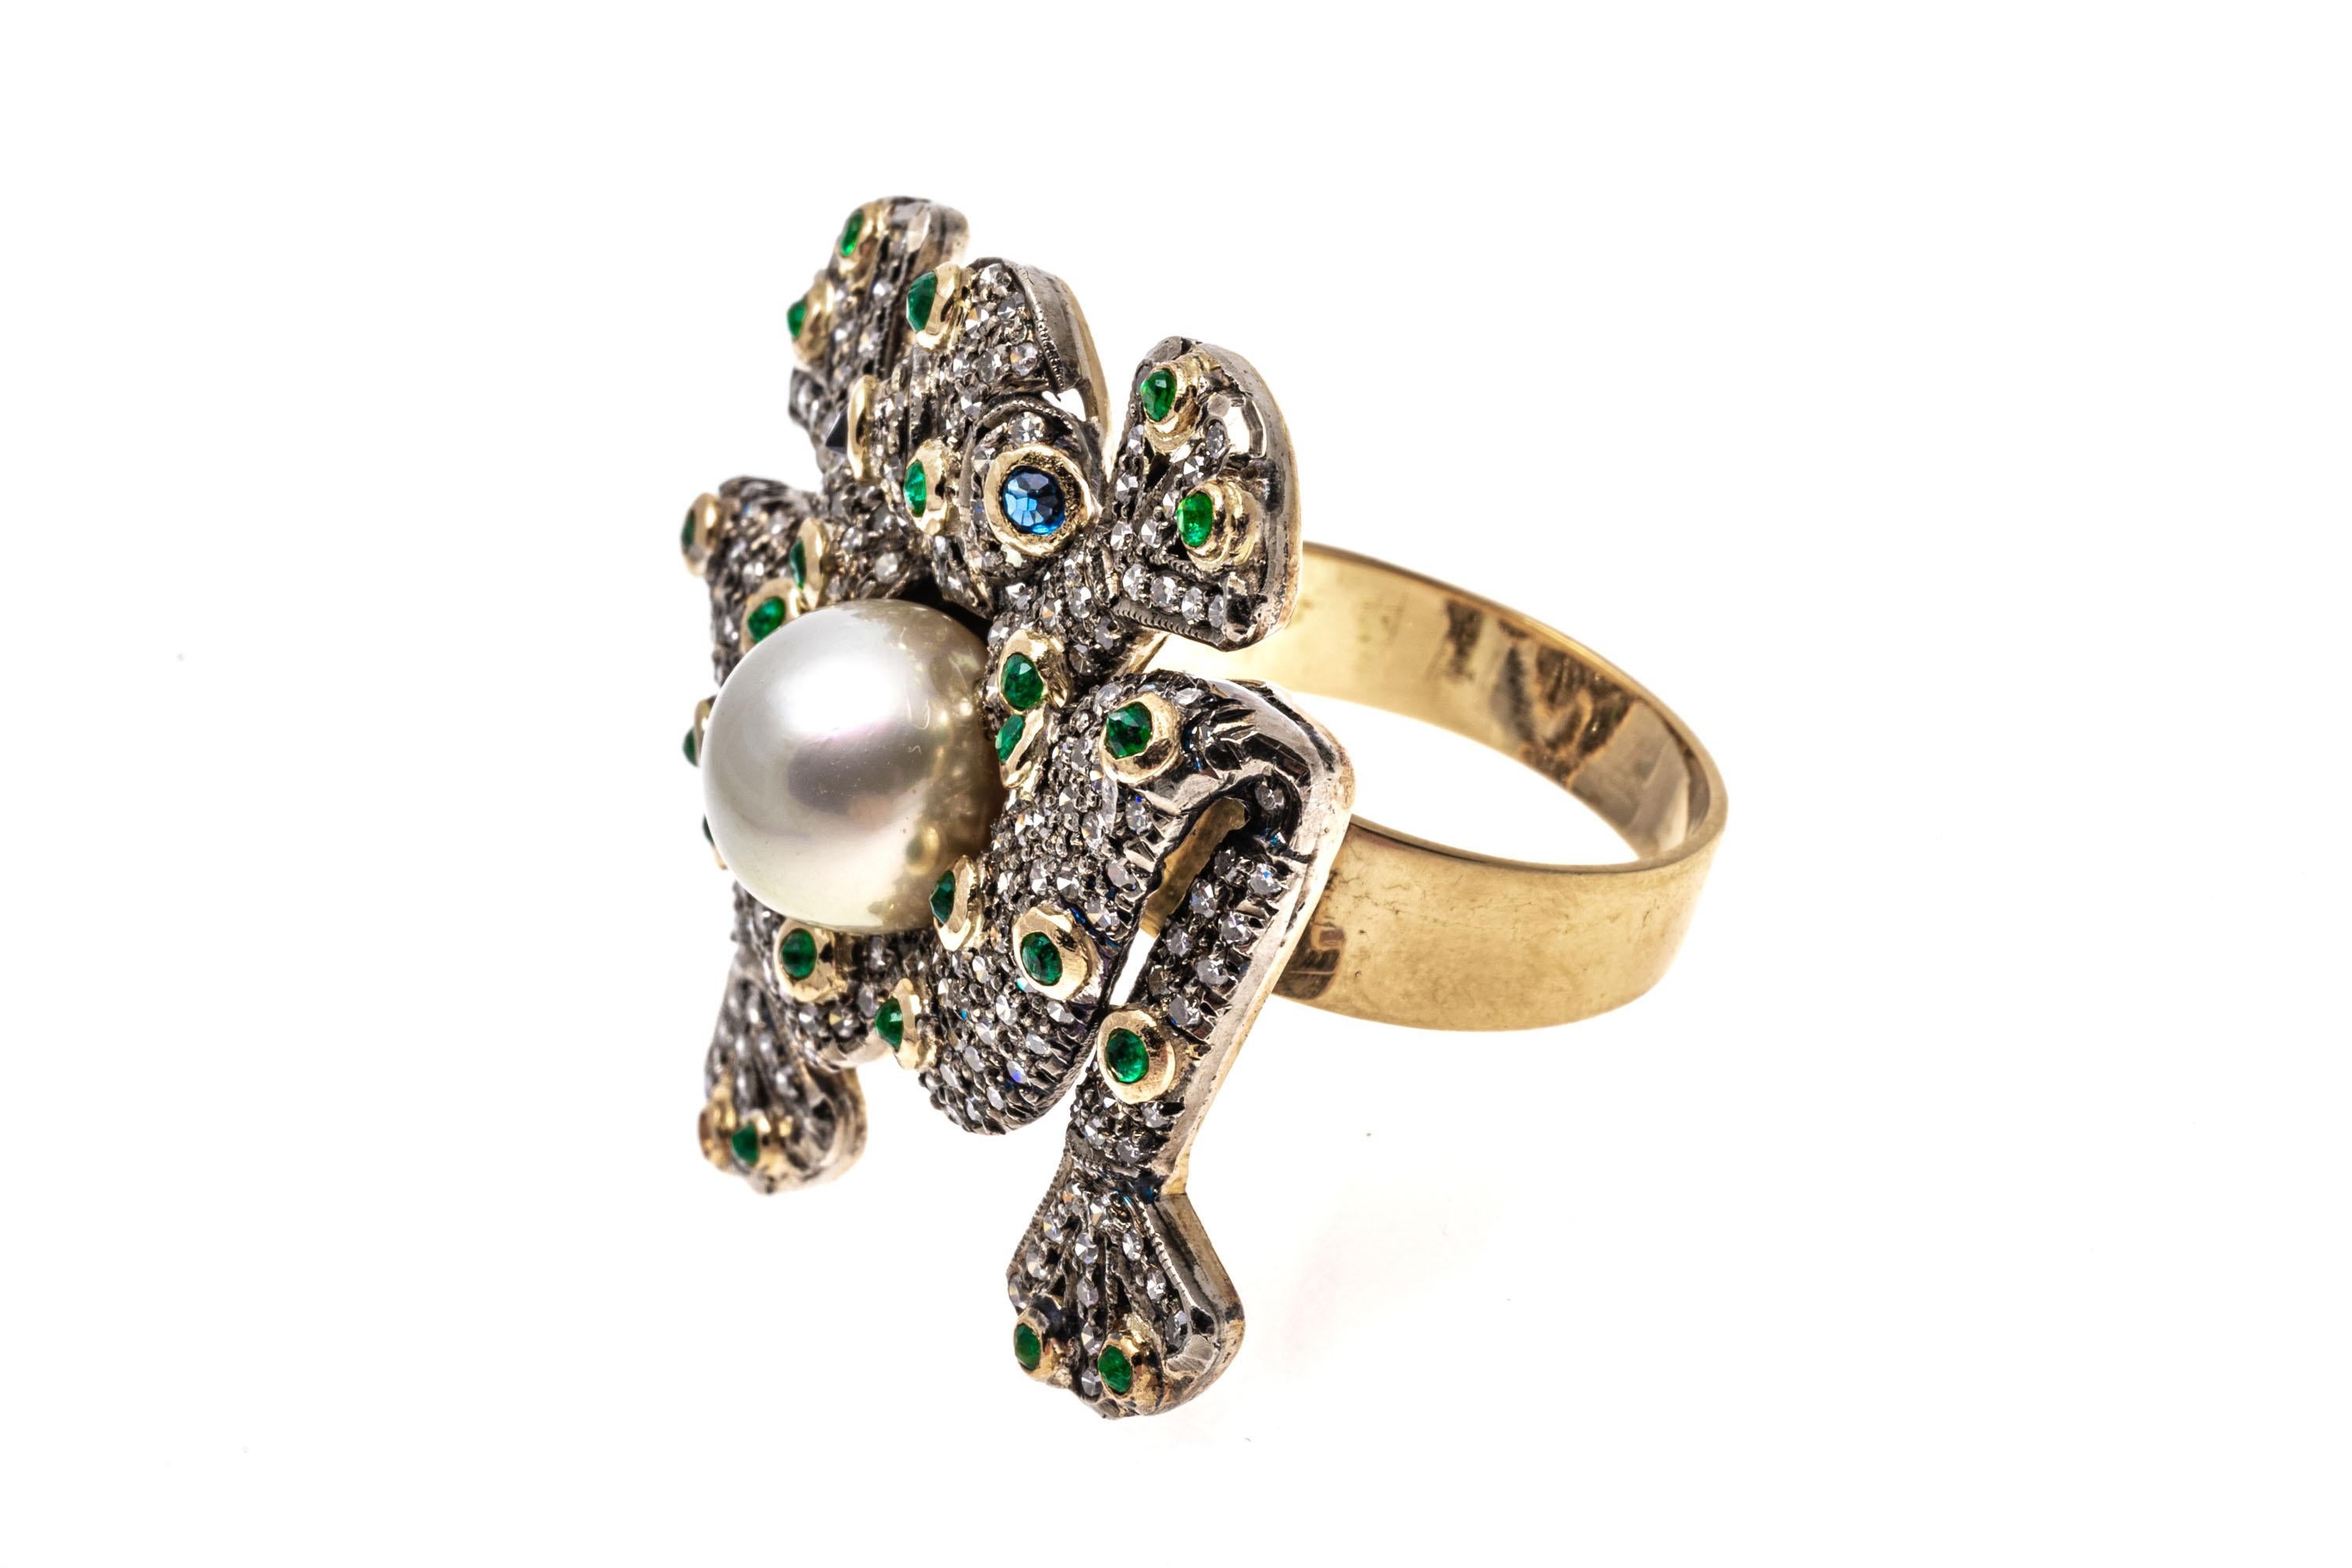 18k Yellow Gold Pave Set Diamond, Emerald and Cultured Pearl Frog Ring For Sale 3